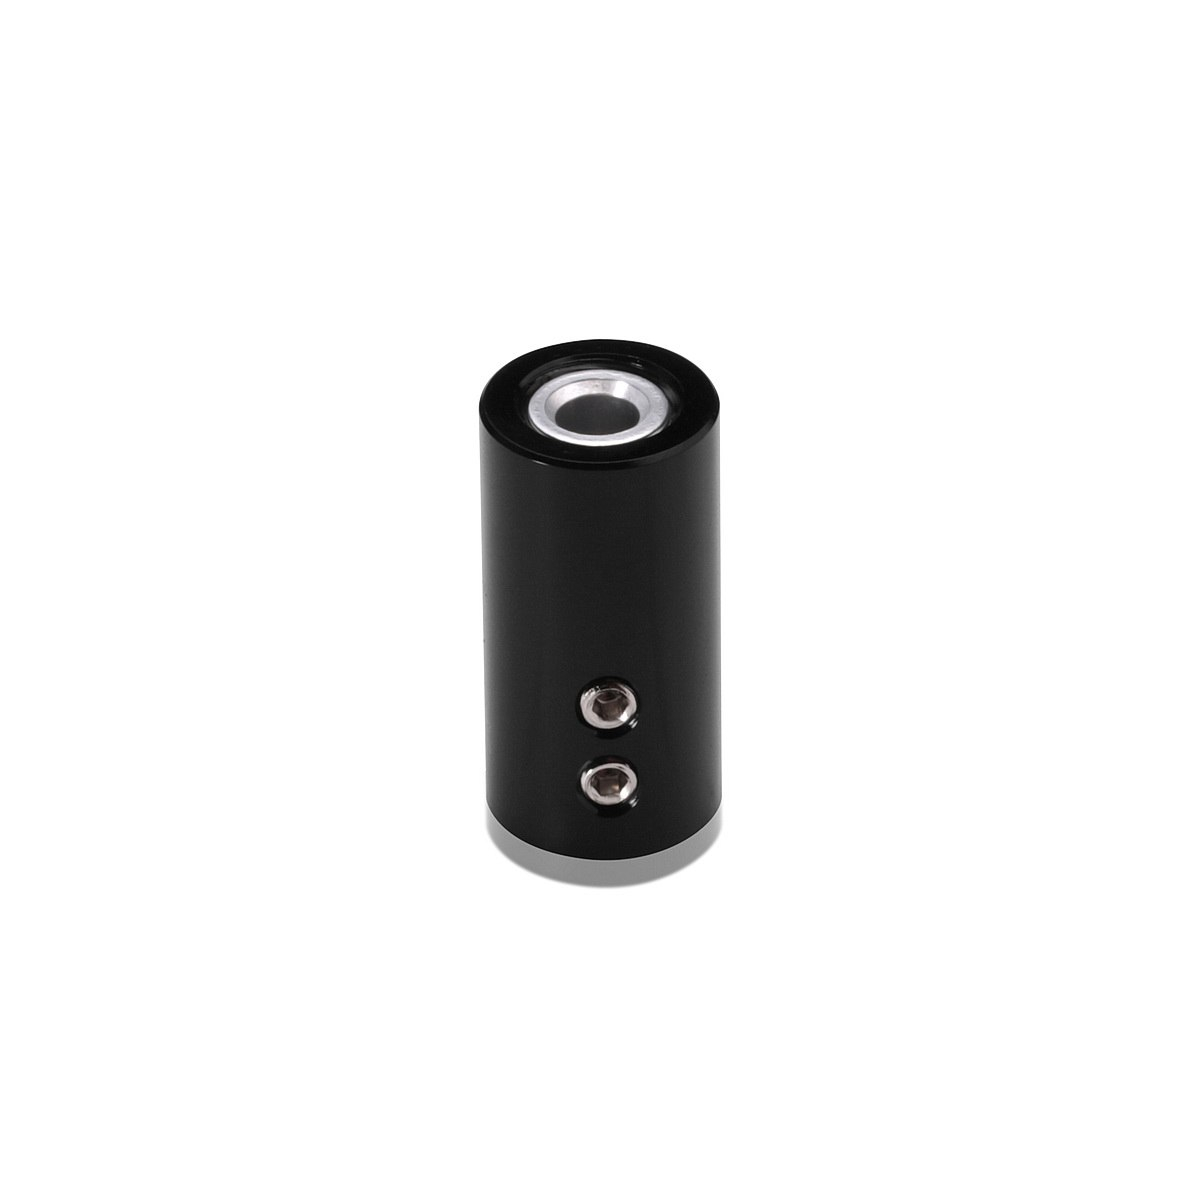 Aluminum Ceiling Mounted Material Holder, Black Anodized Finish